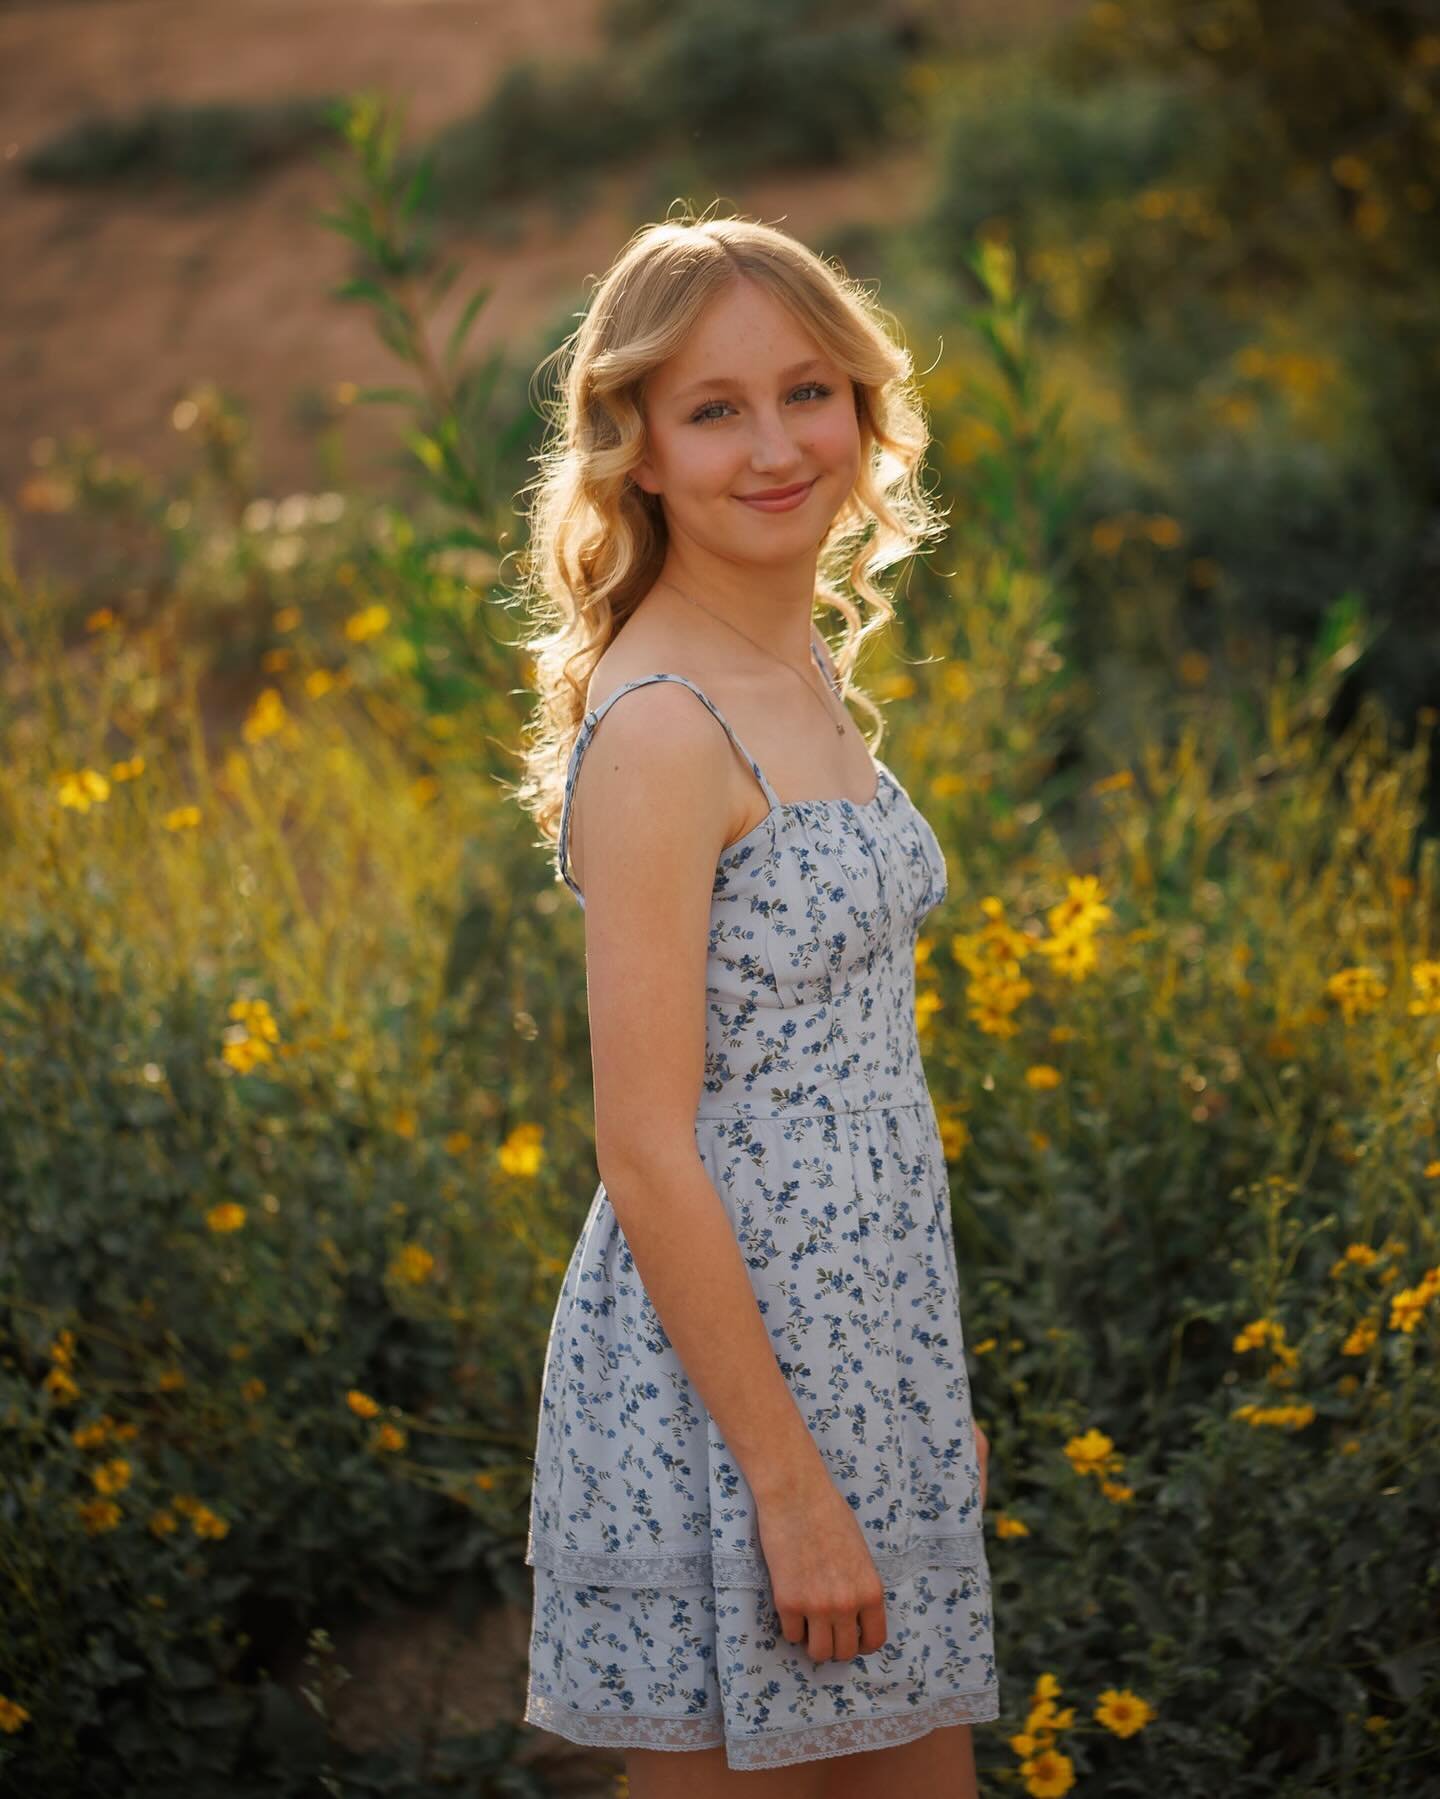 This is a good reminder of how beautiful is Arizona in the spring 🌼 Meet beautiful Helayna for her Portrait Session.  She is such a beautiful girl inside and out!

Teen Sessions are such a gift, the teen years are filled with memorable moments and m